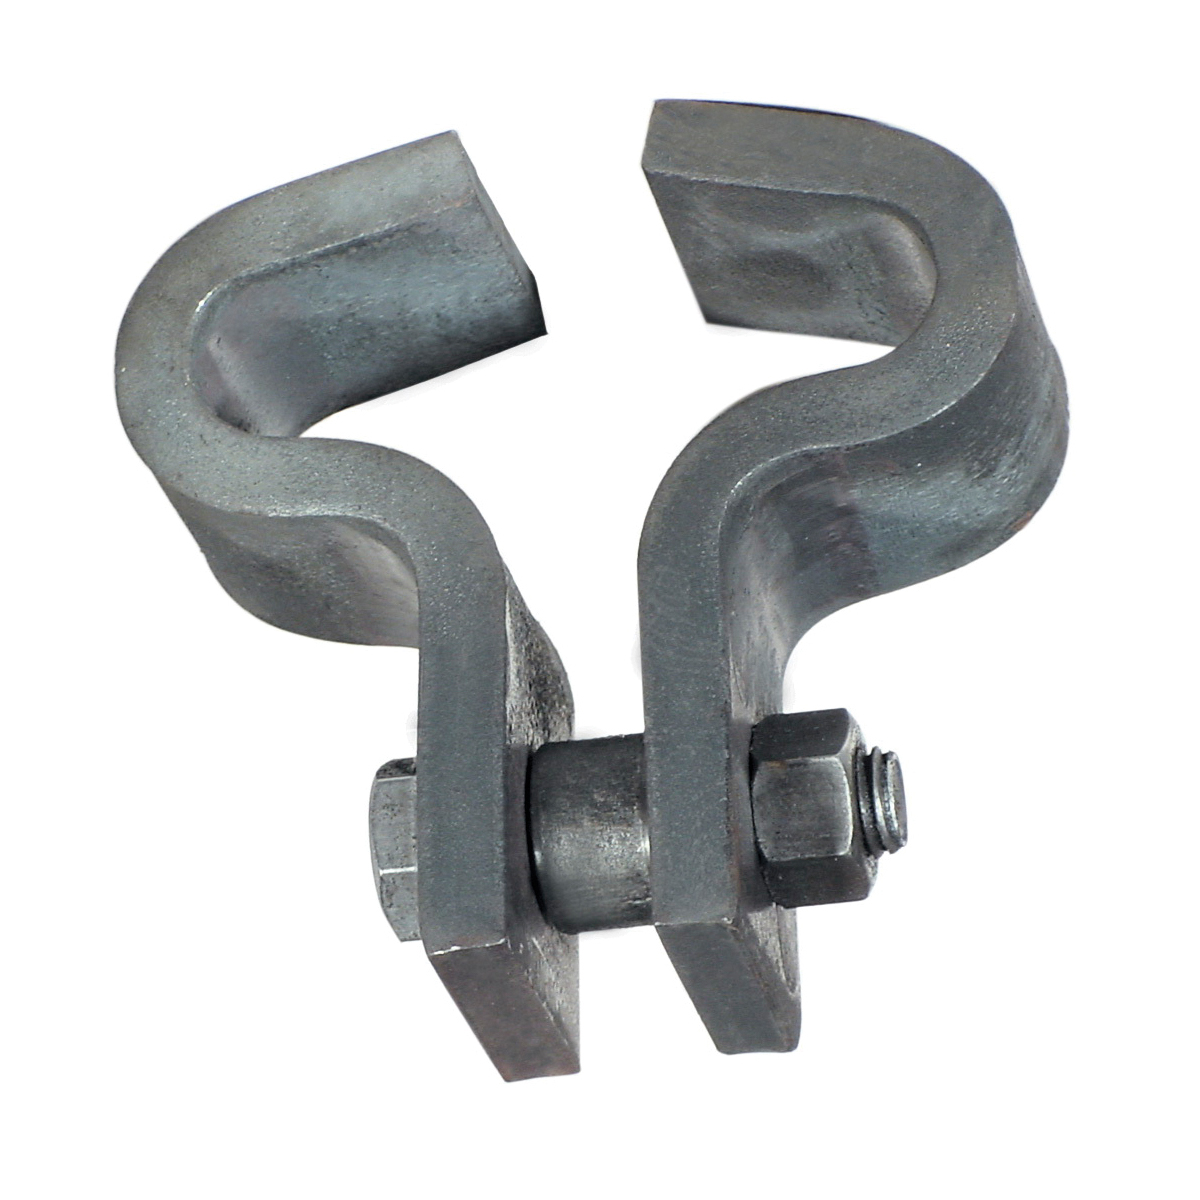 Anvil® 0500315148 FIG 134 Heavy Duty Beam Clamp, 7/8 in THK Flange, 3000 lb Load, Carbon Steel, Galvanized